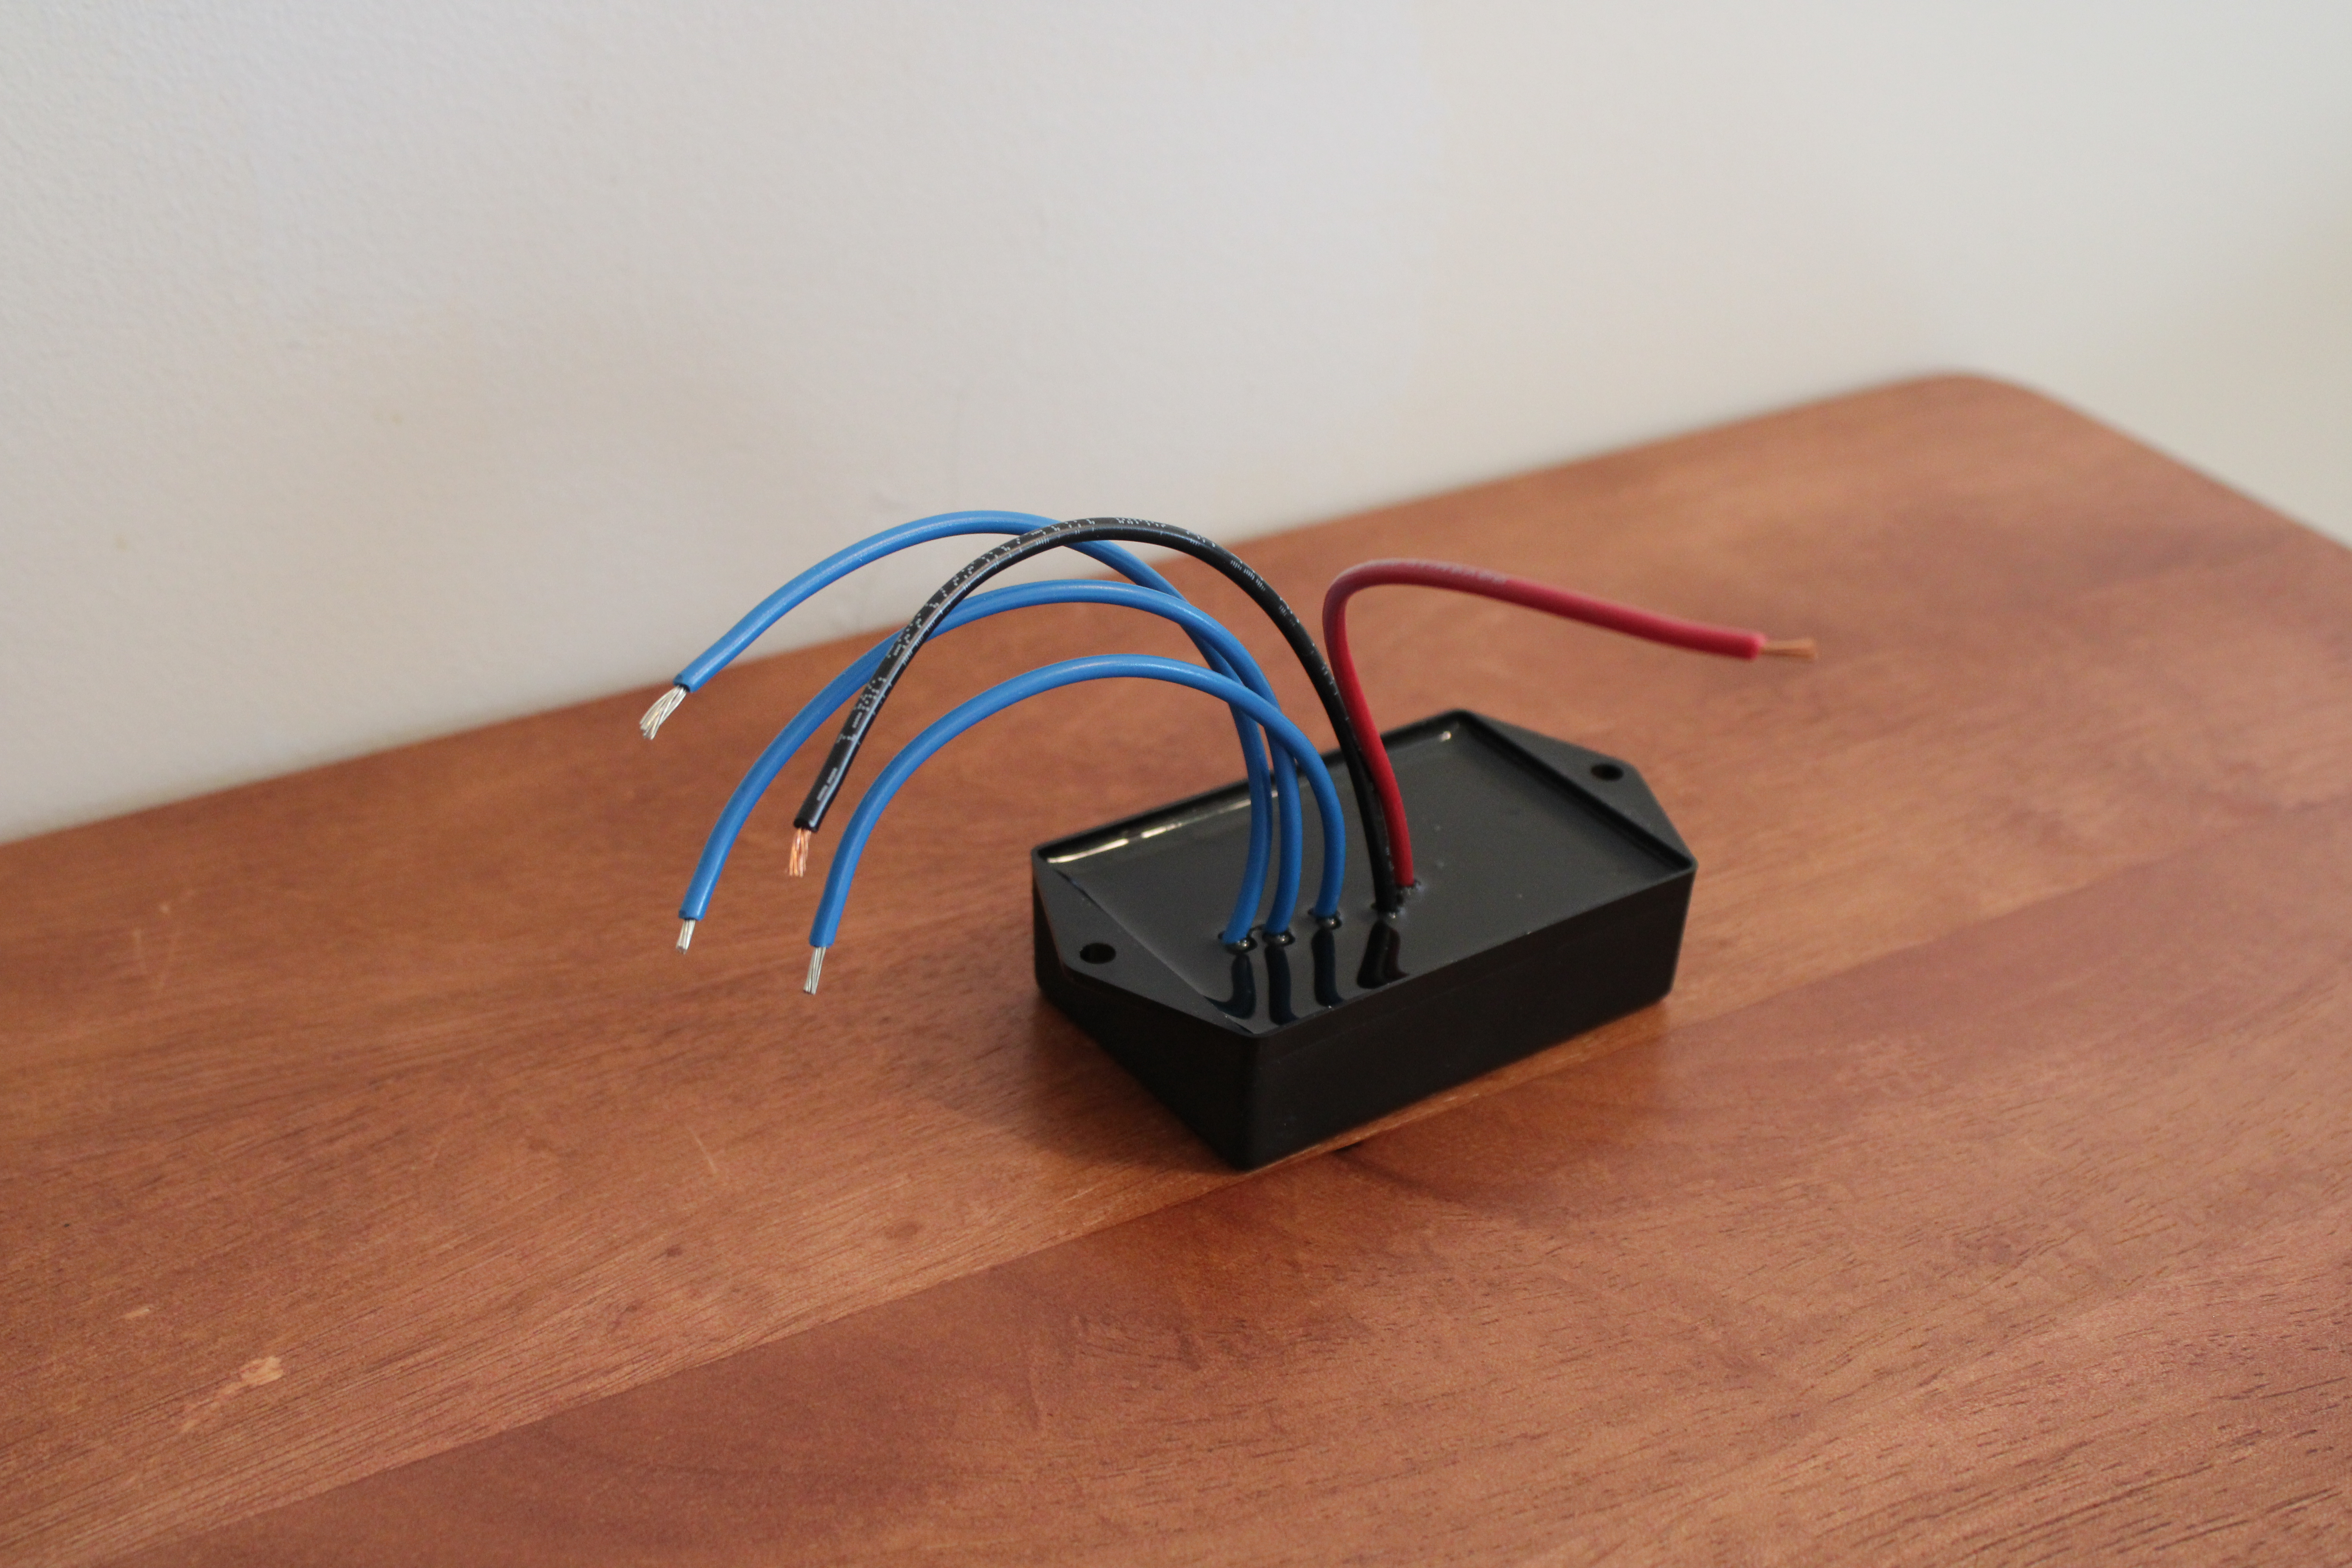 Voltage regulator on a table, small black box with blue and red wires sticking out of it.